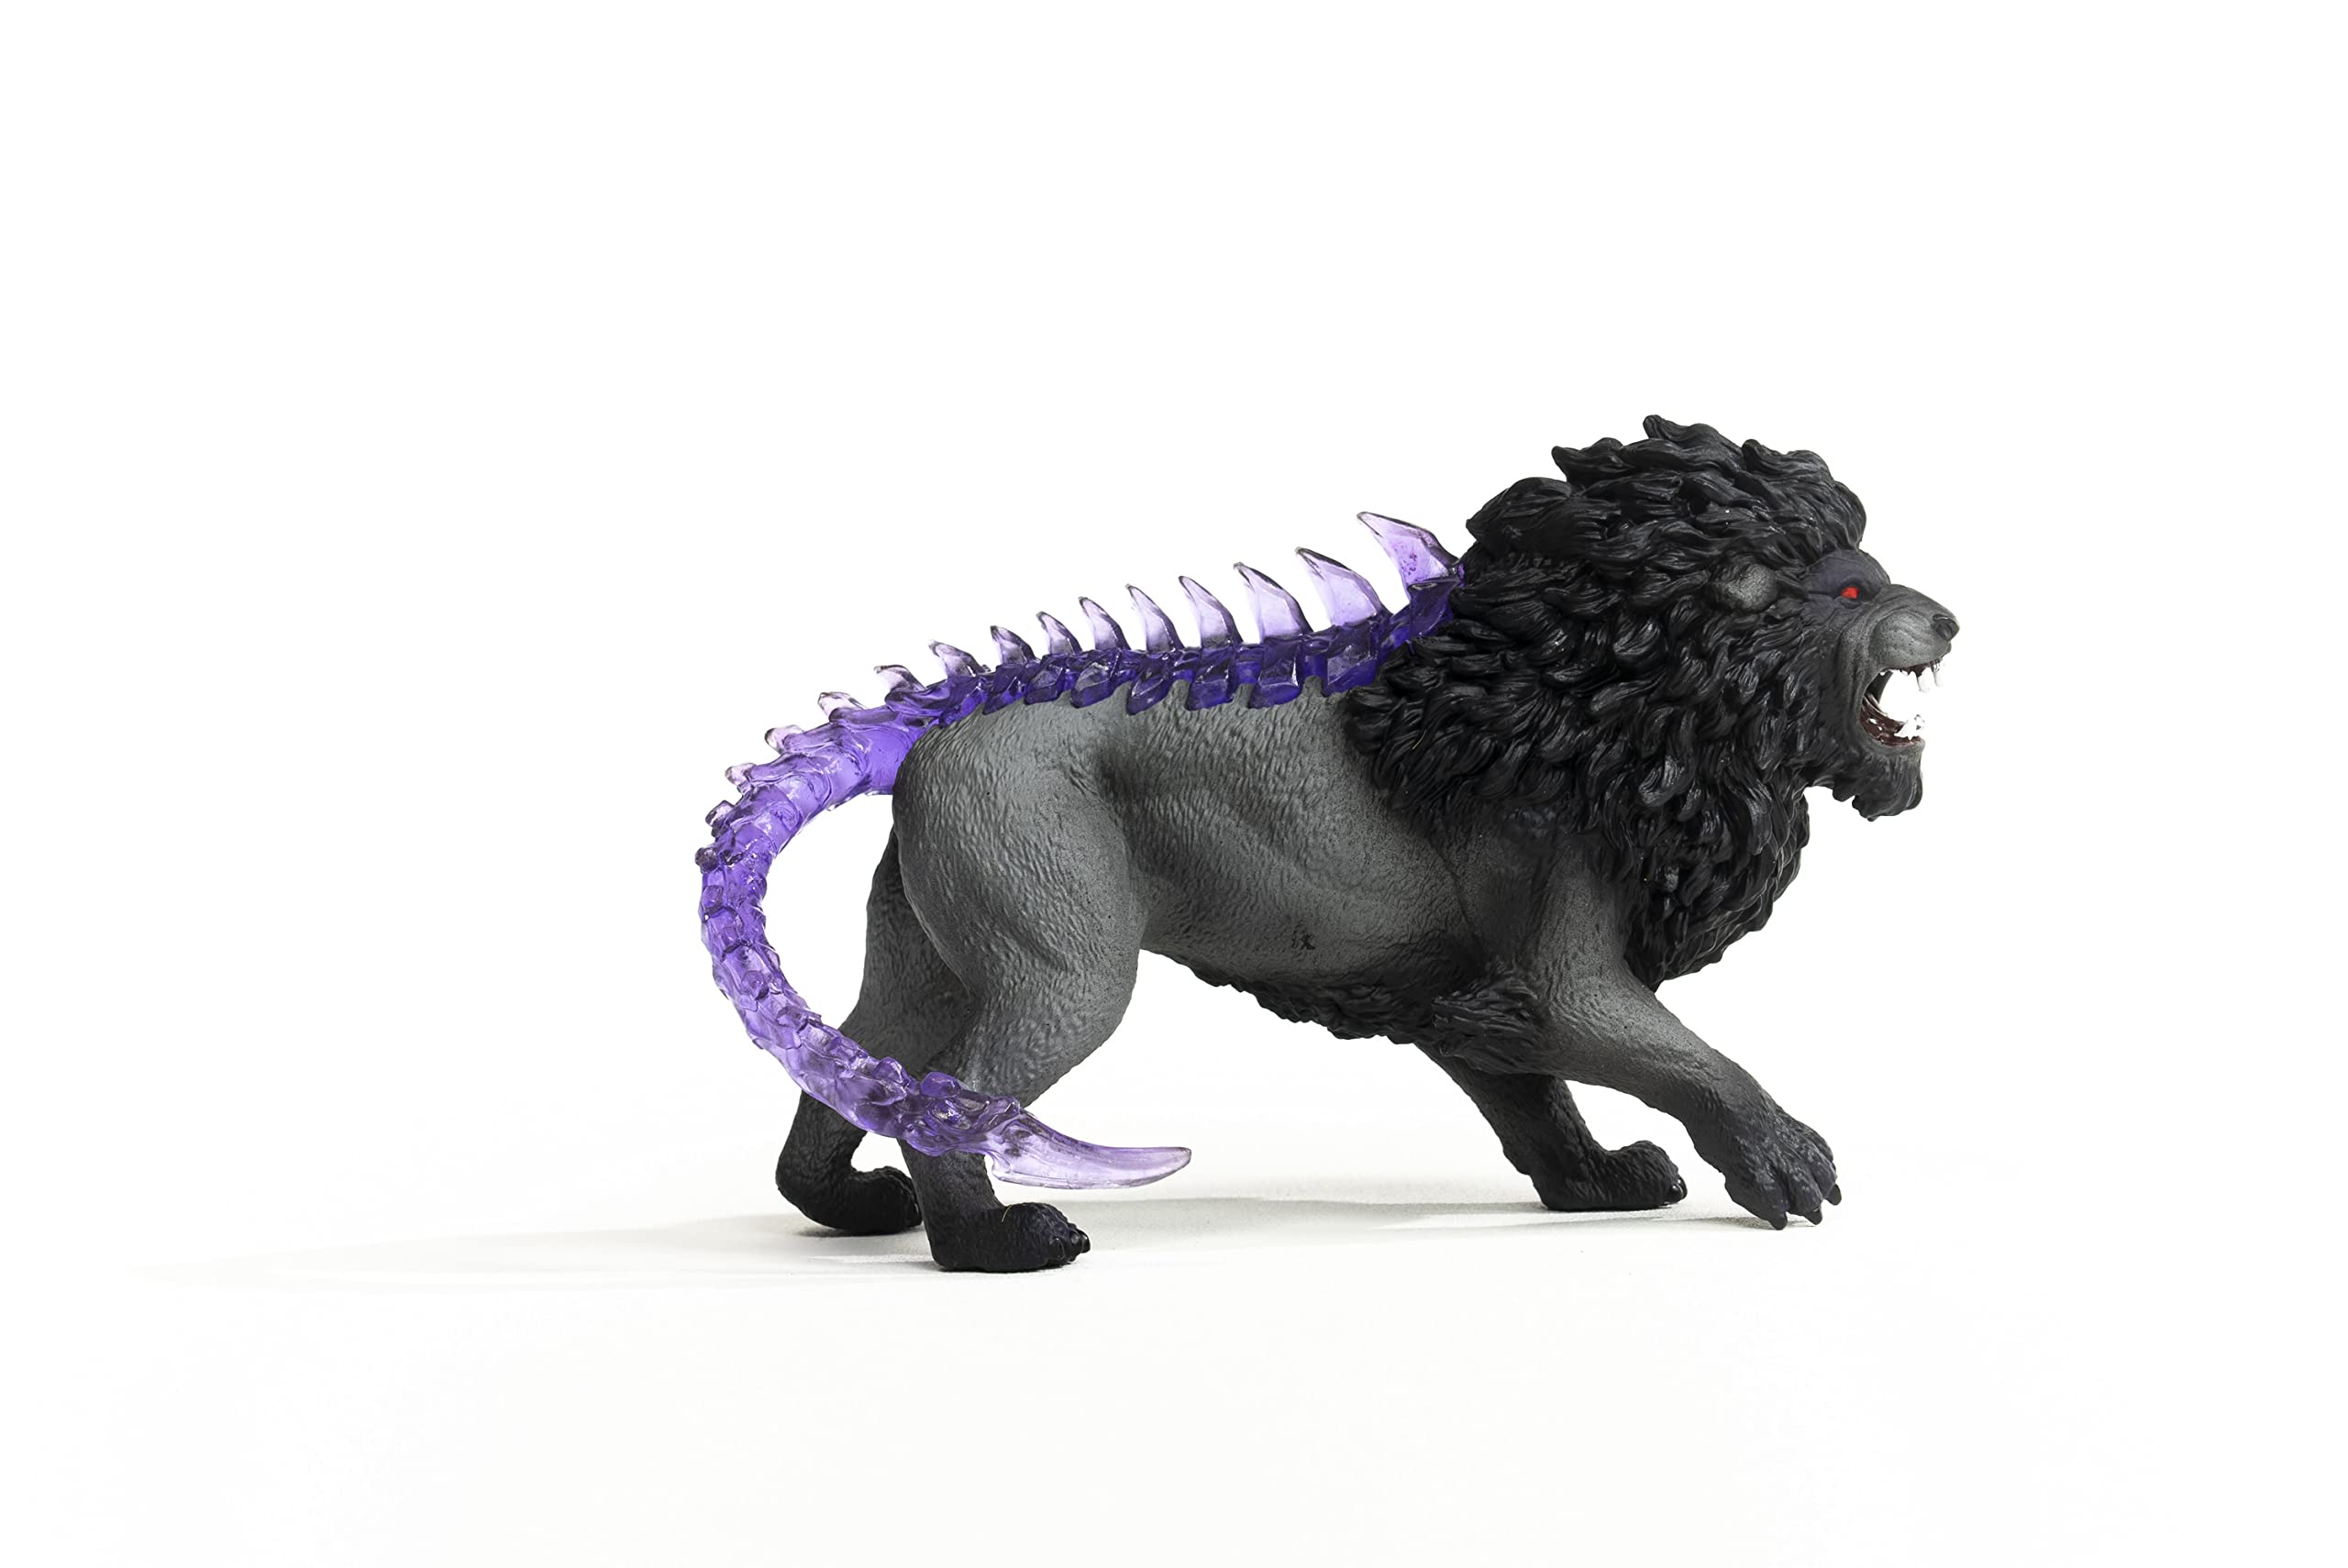 Schleich Eldrador Creatures, Mythical Creatures Toys for Boys and Girls, Shadow Lion Action Figure, Ages 7+